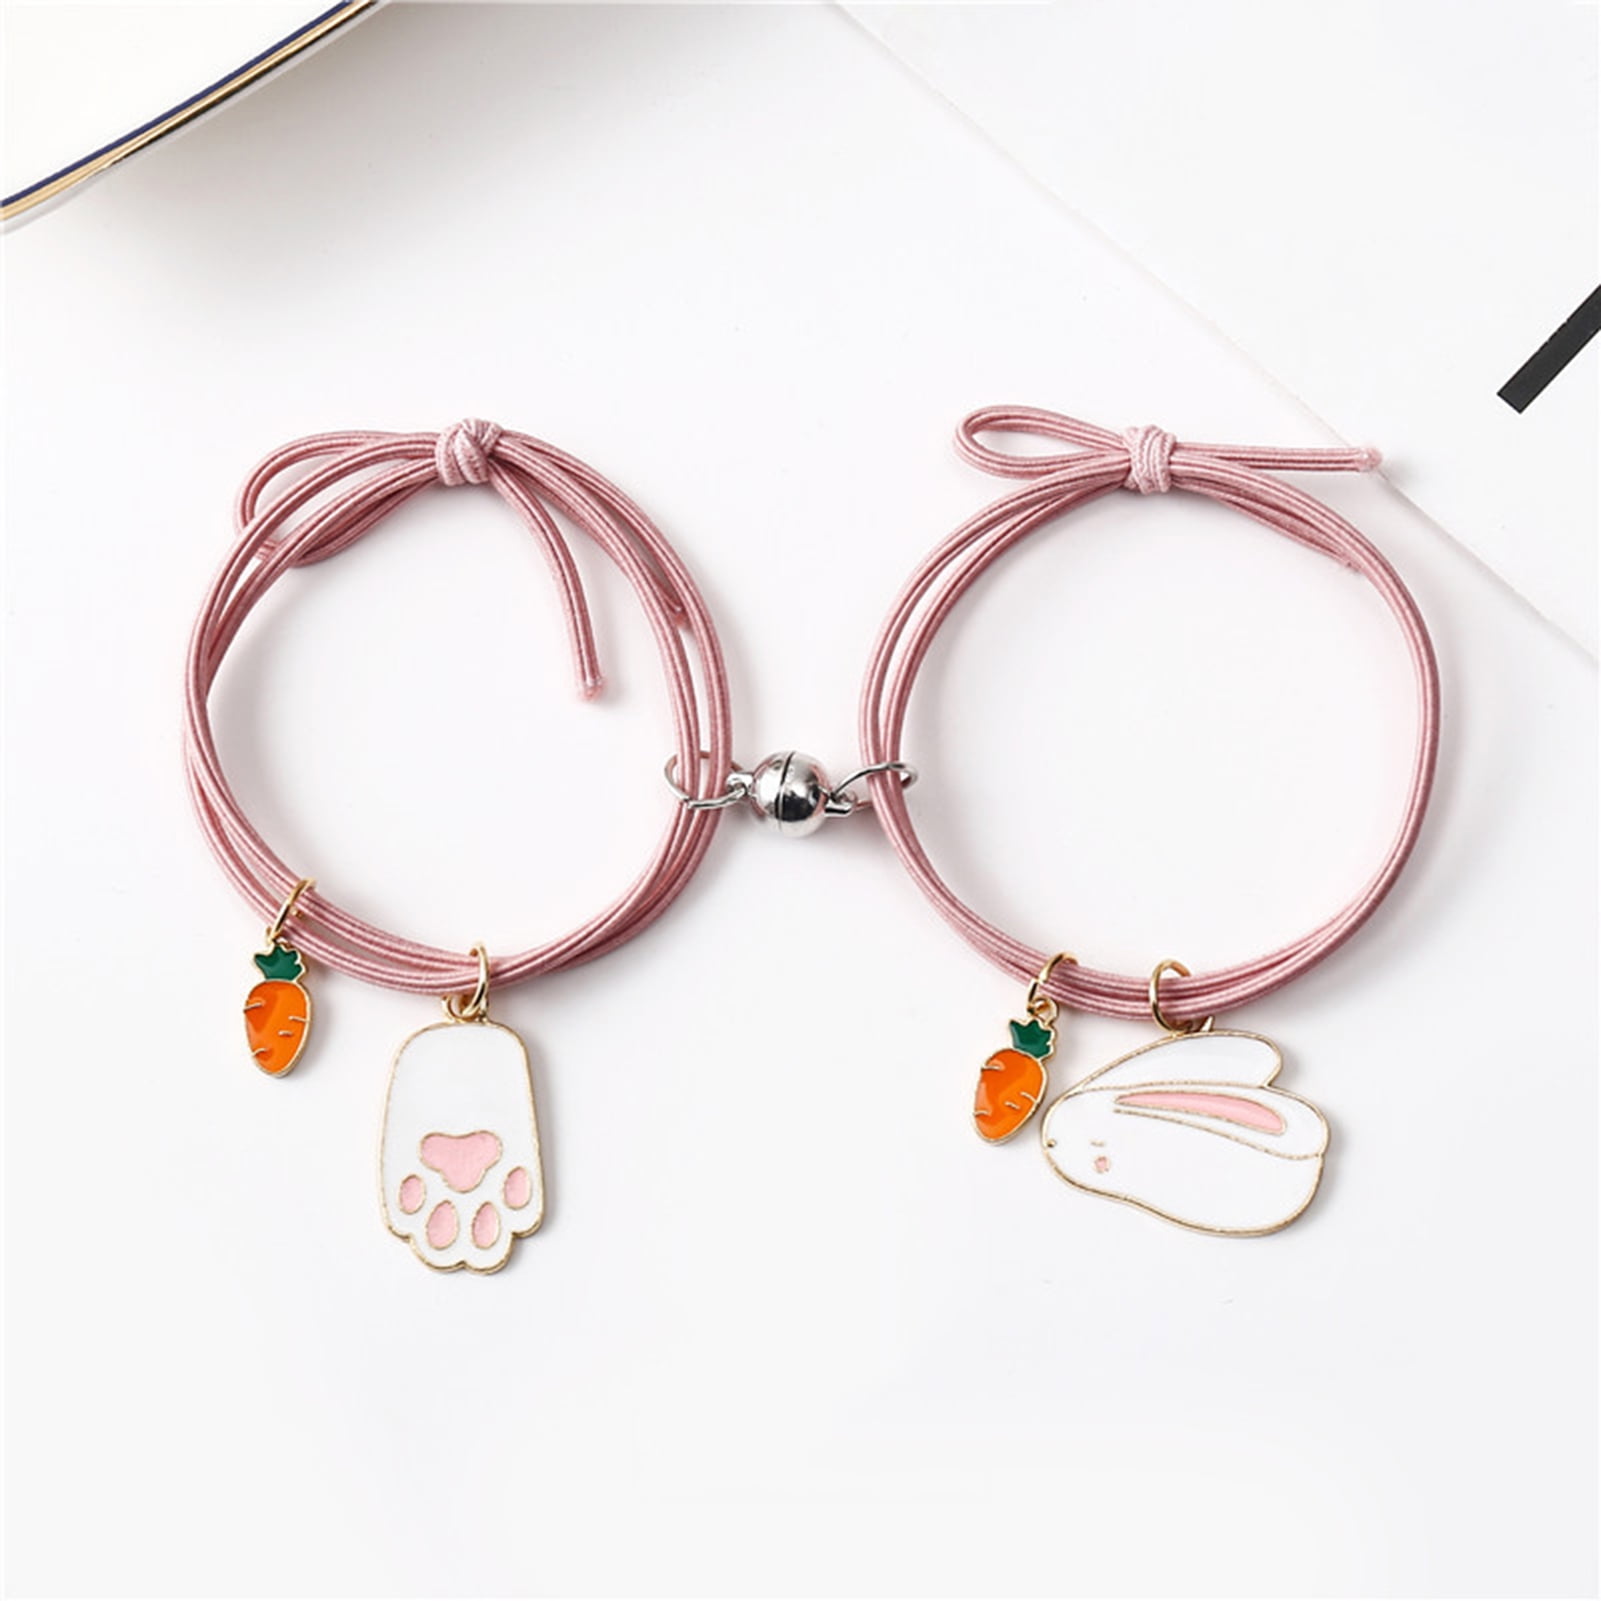 Anvazise 1 Pair Couple Bracelets Magnet Stone Cute Animal Knotted  Adjustable Elastic Rope Decorative Valentines Day Gift Time Rabbit Pendant  Lover Bracelets Rubber Bands for Student Dark Pink  Walmartcom